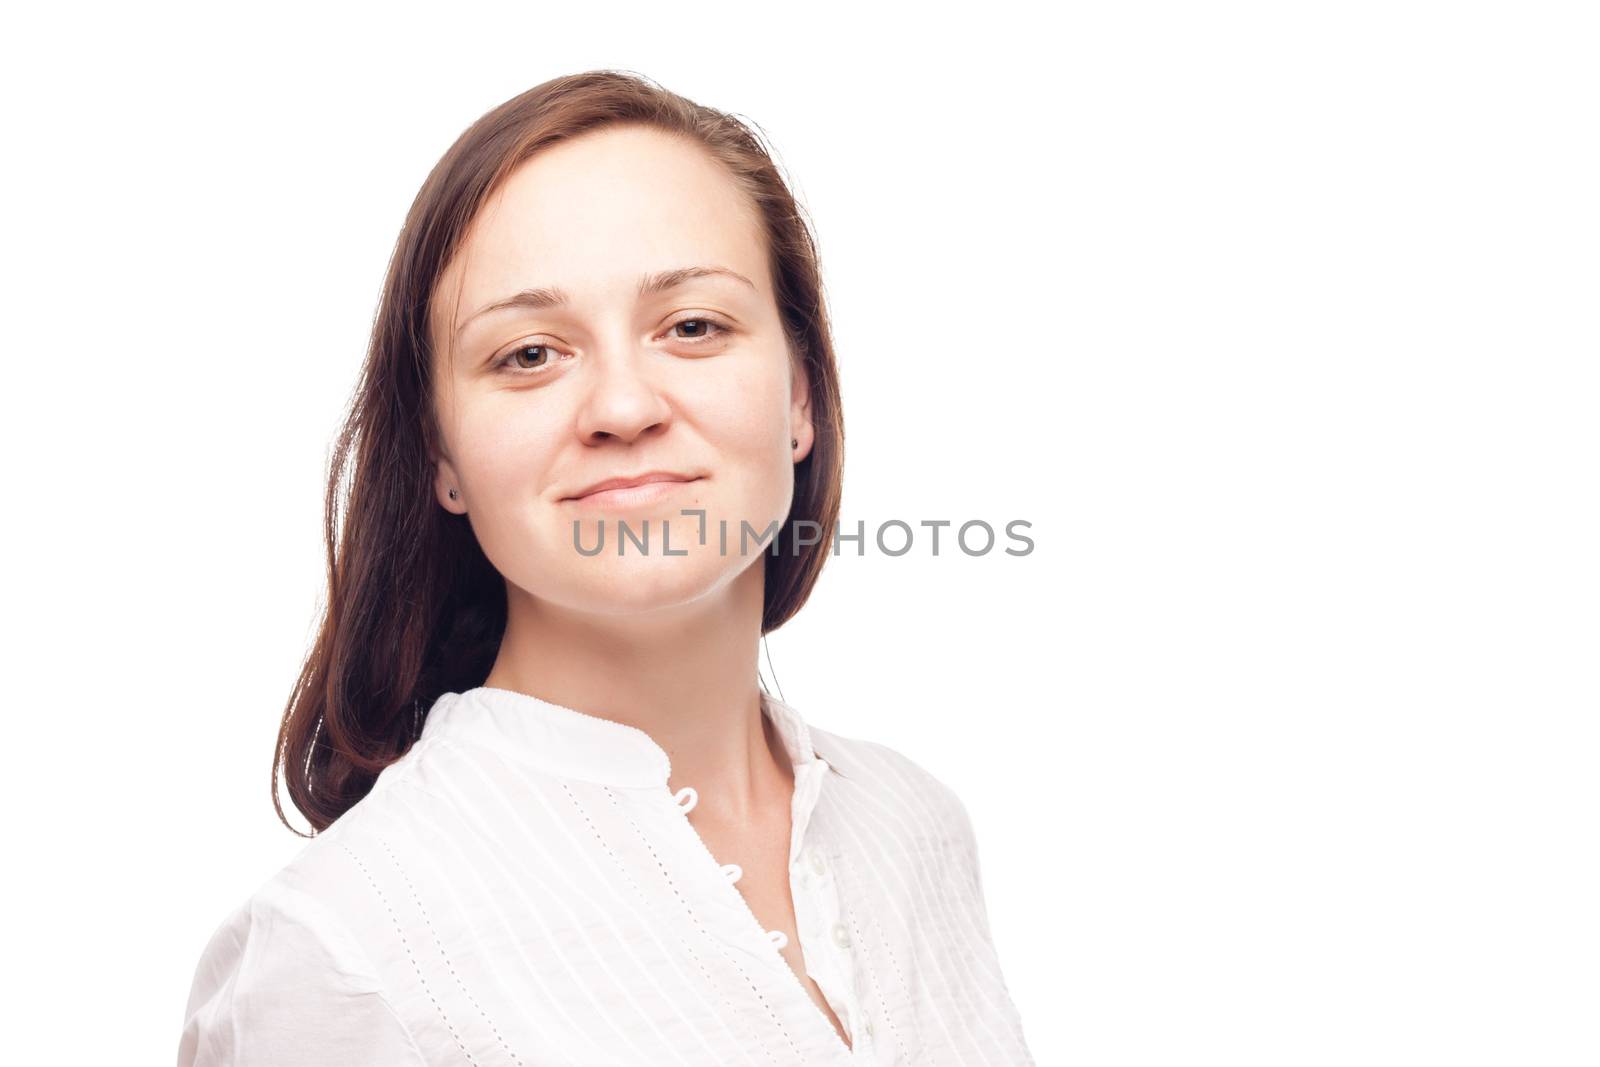 portrait of a smiling woman on white background